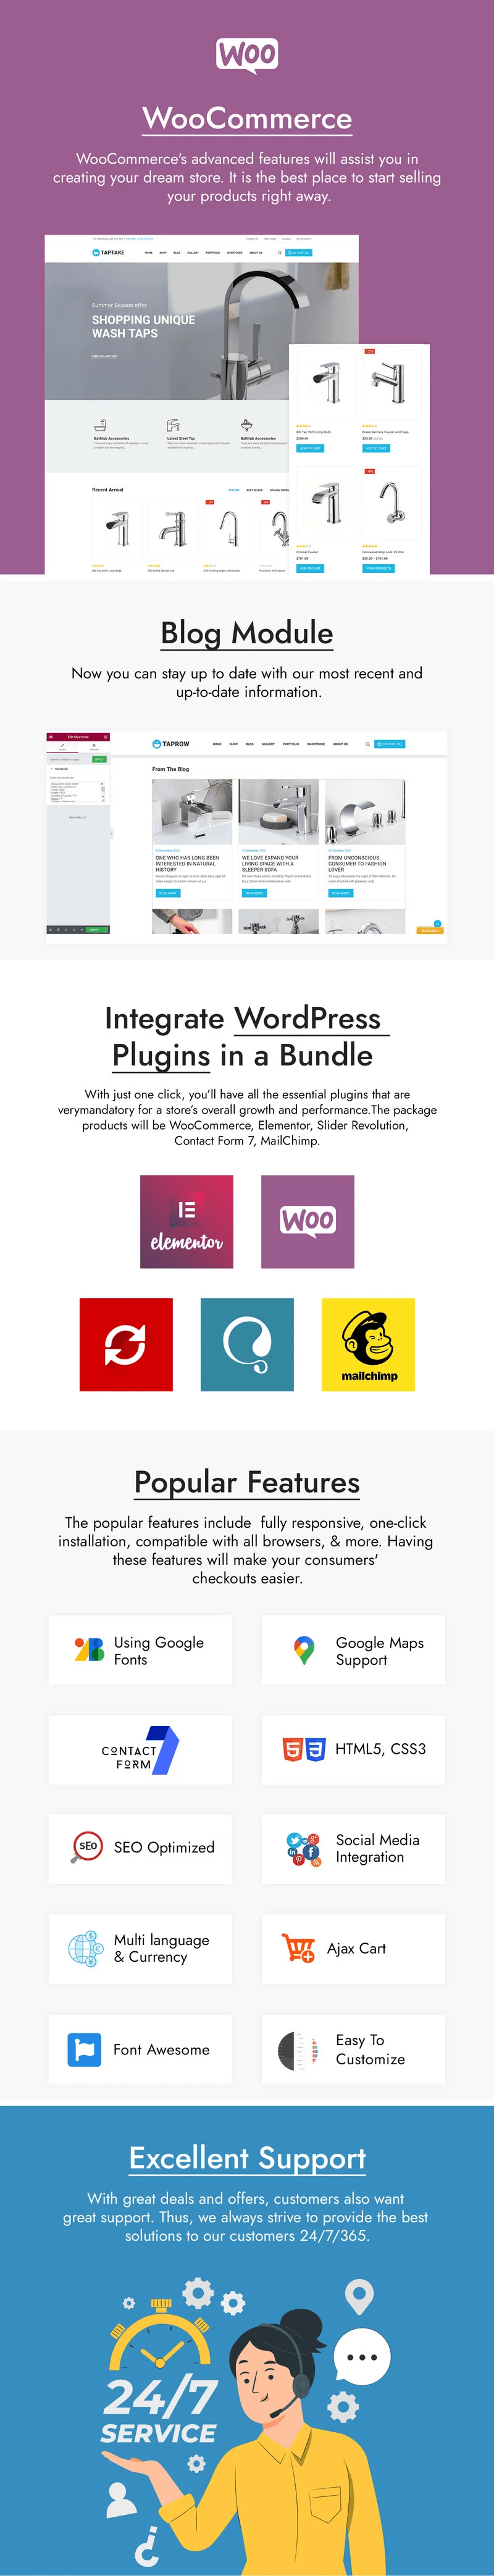 Images of plugins and scripts are attached.